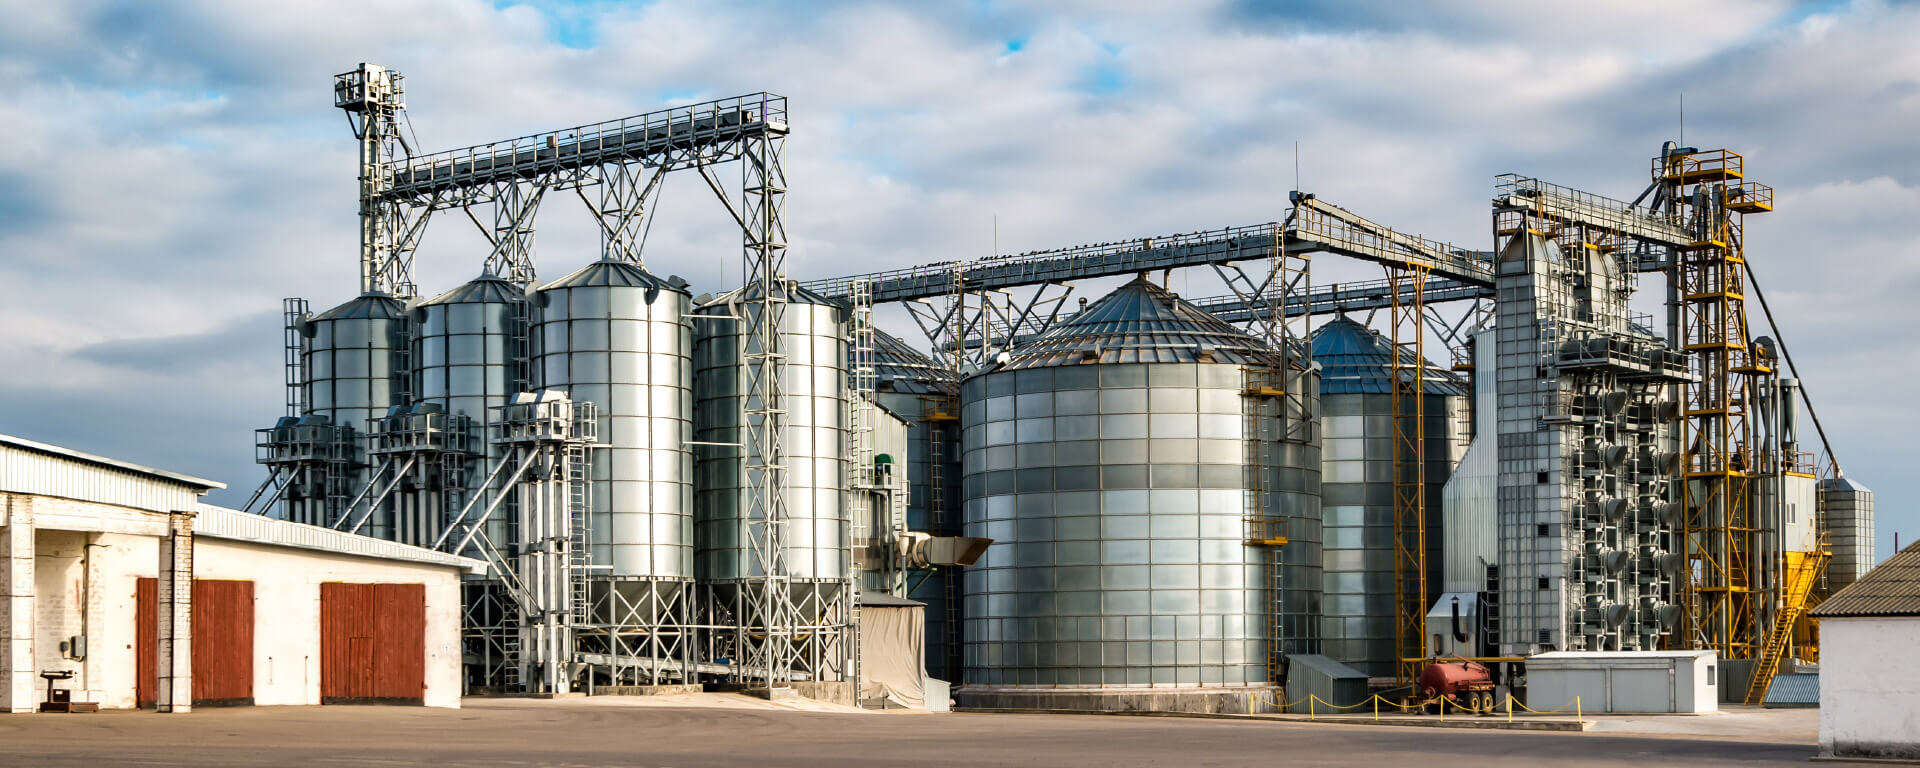 Plant with silos of different sizes in a yard in front of a cloudy sky